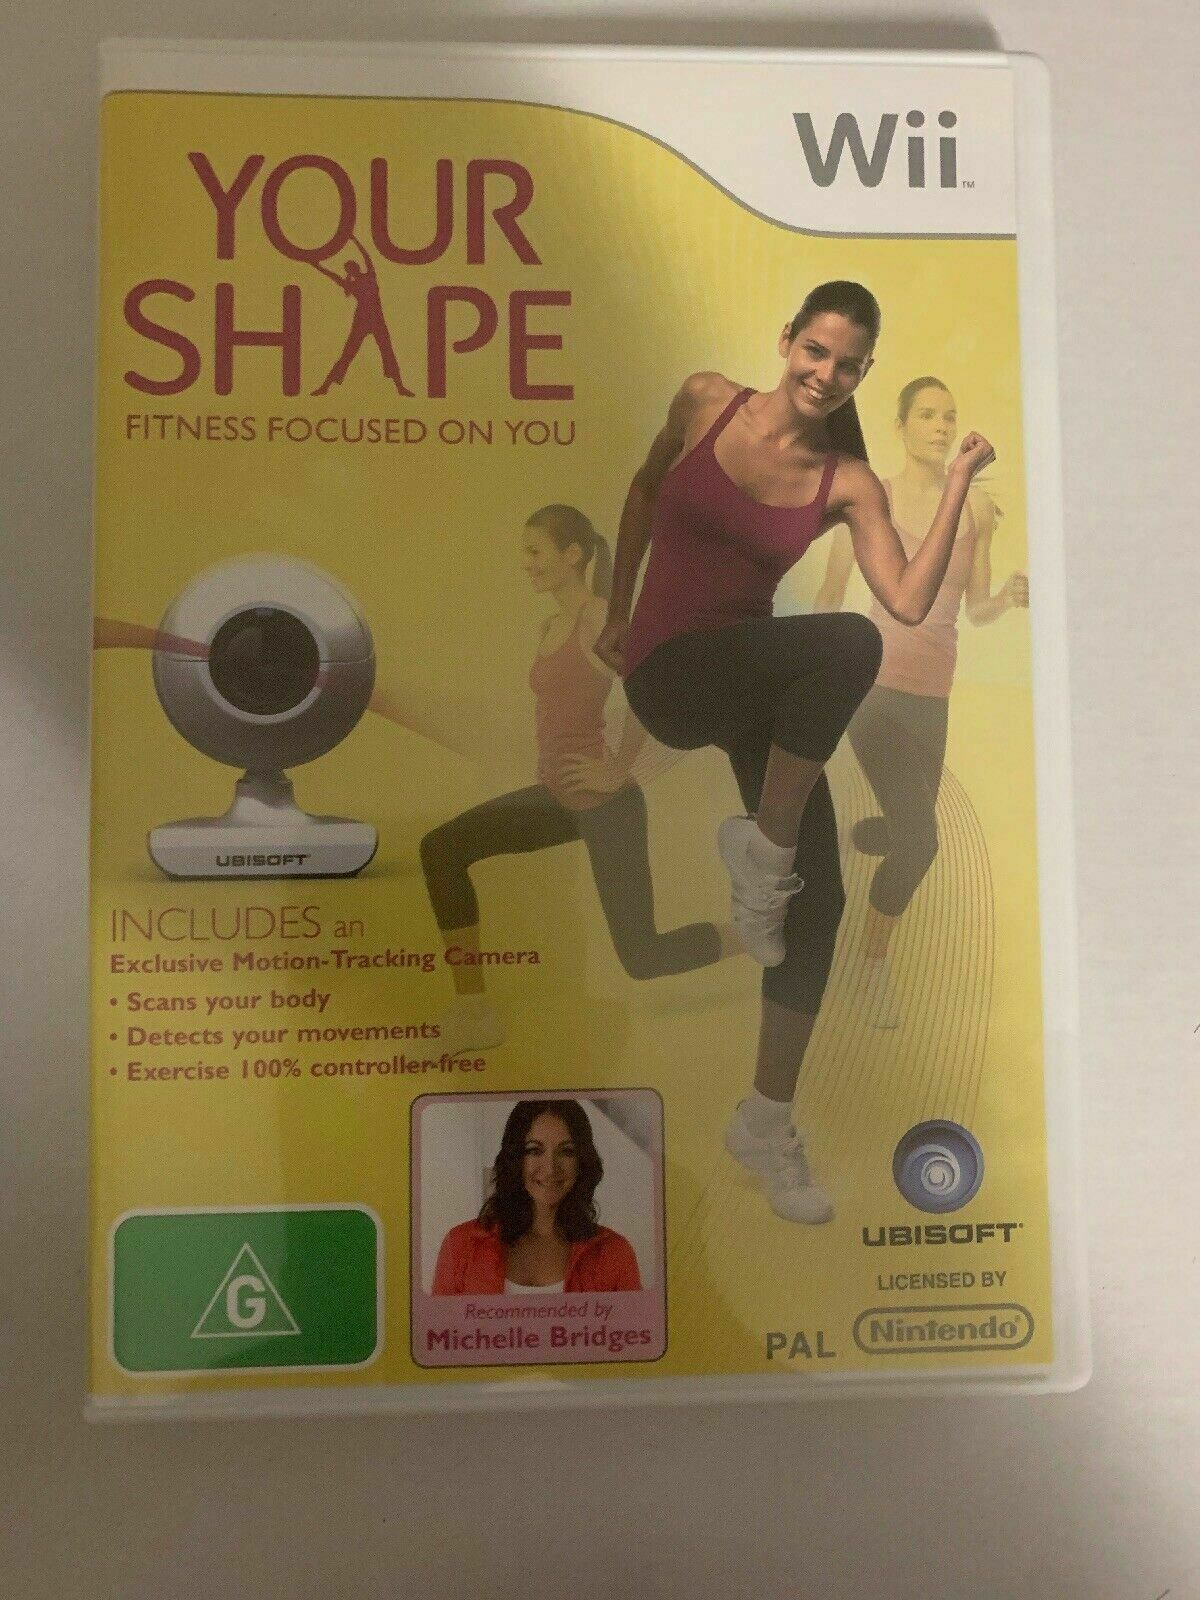 Your Shape Fitness with USB Motion Tracking Camera - Nintendo Wii PAL Game